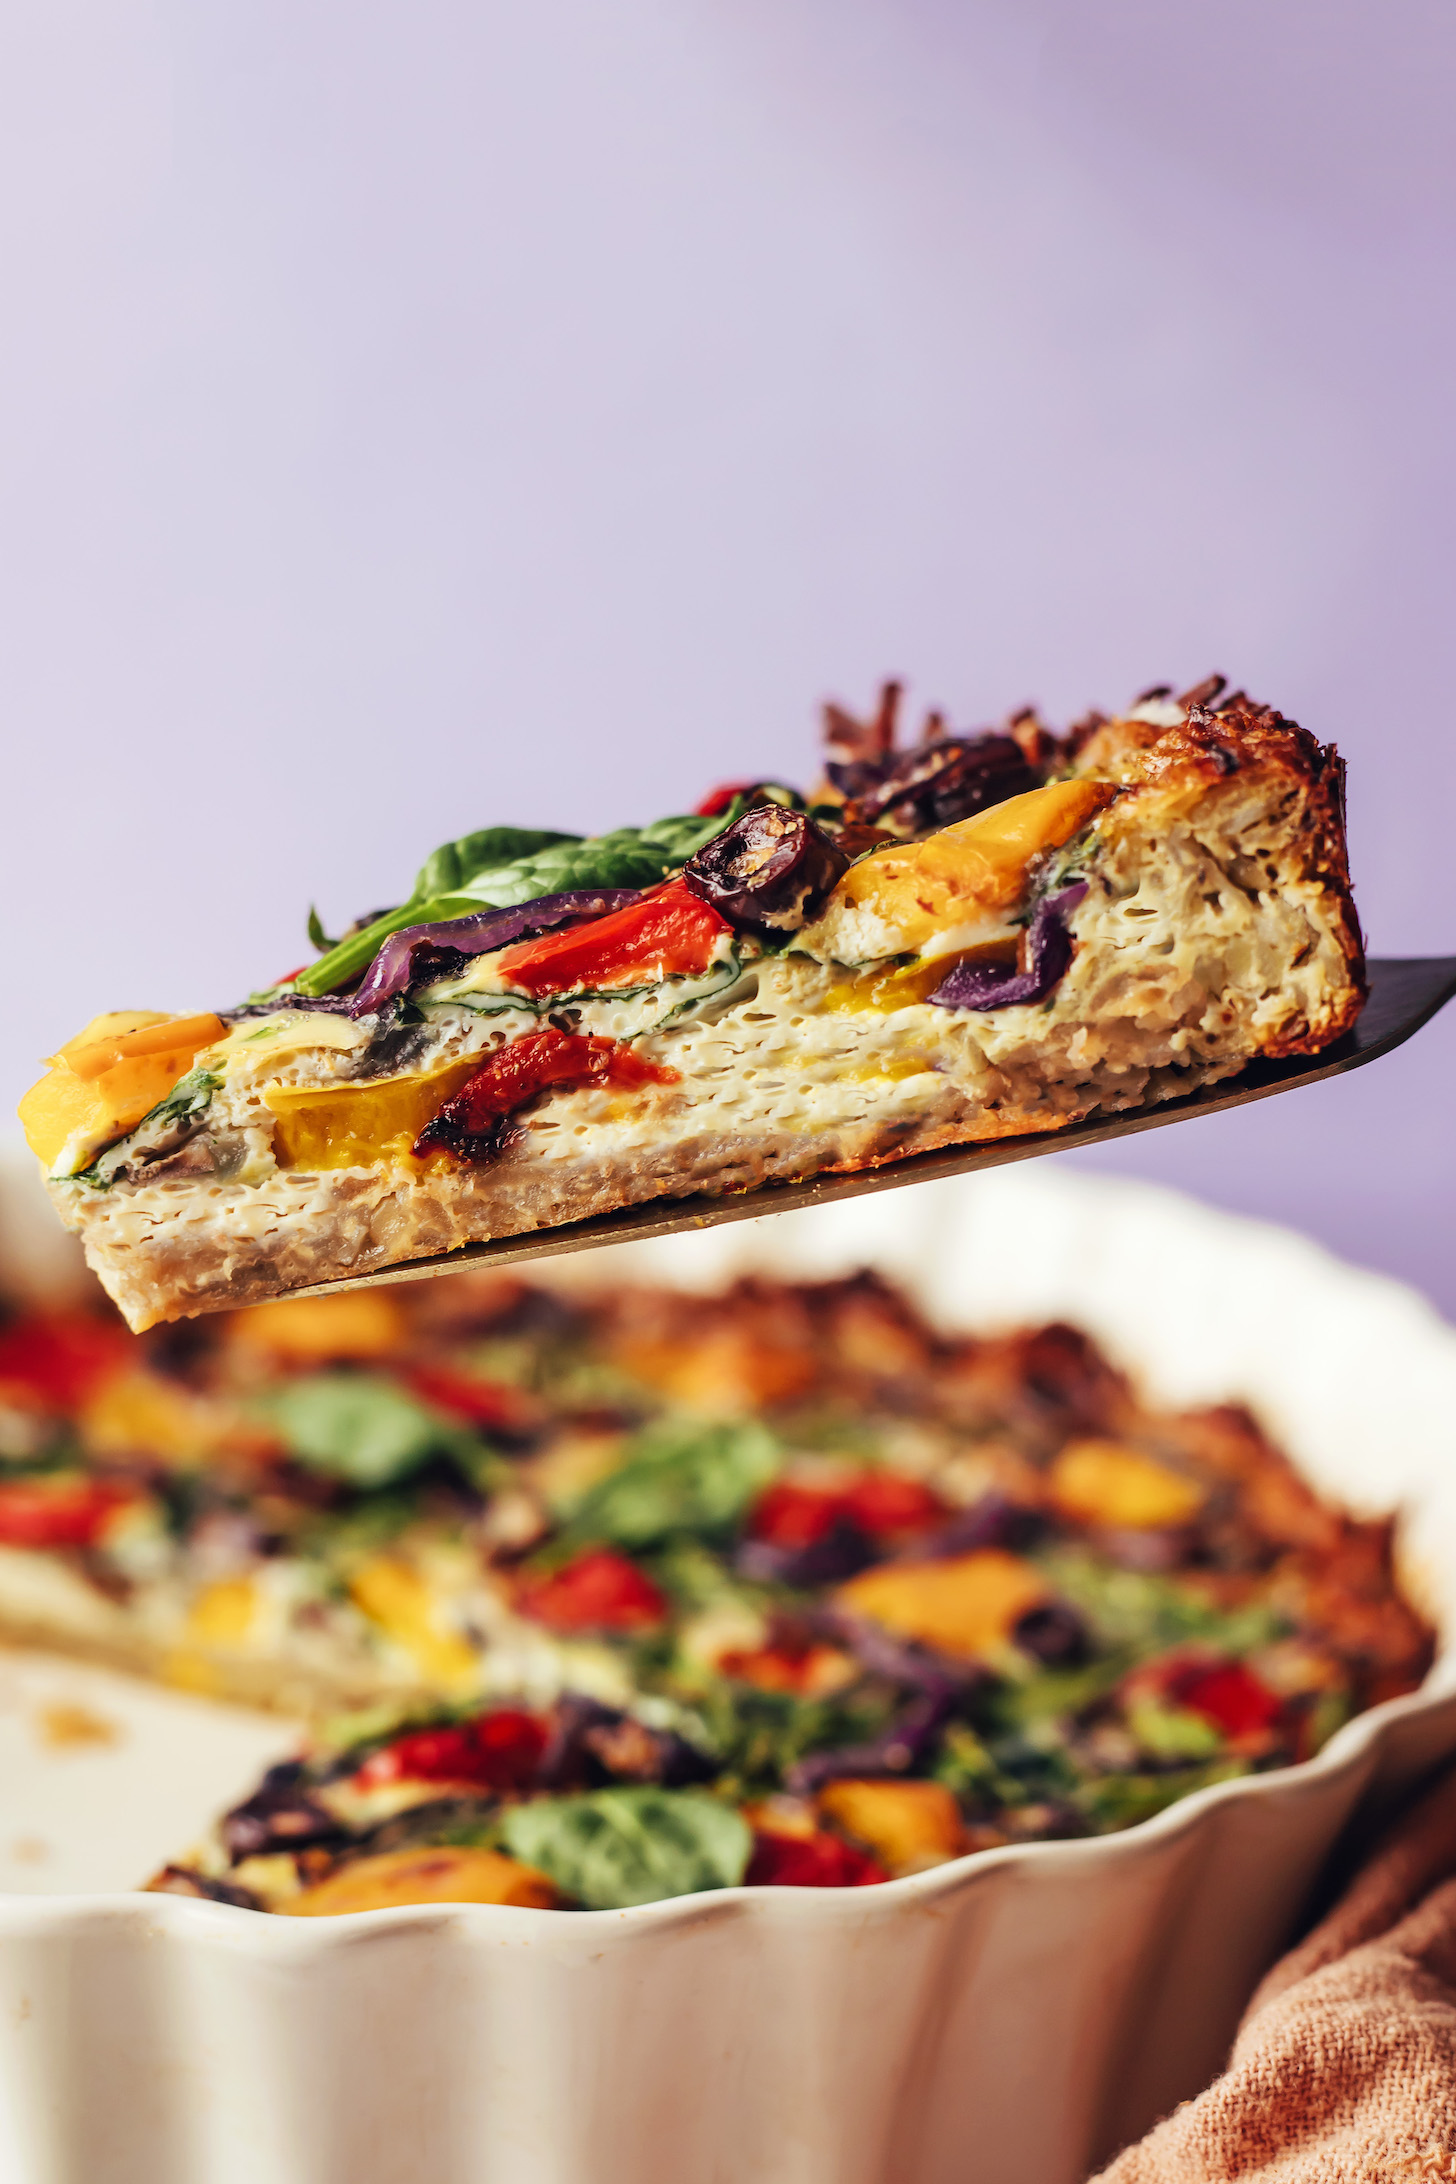 This potato crust quiche is something we can't wait for you to try! It’s: Vibrant, Savory, Satisfying, Nourishing, Gluten-free, dairy-free and SO delicious!